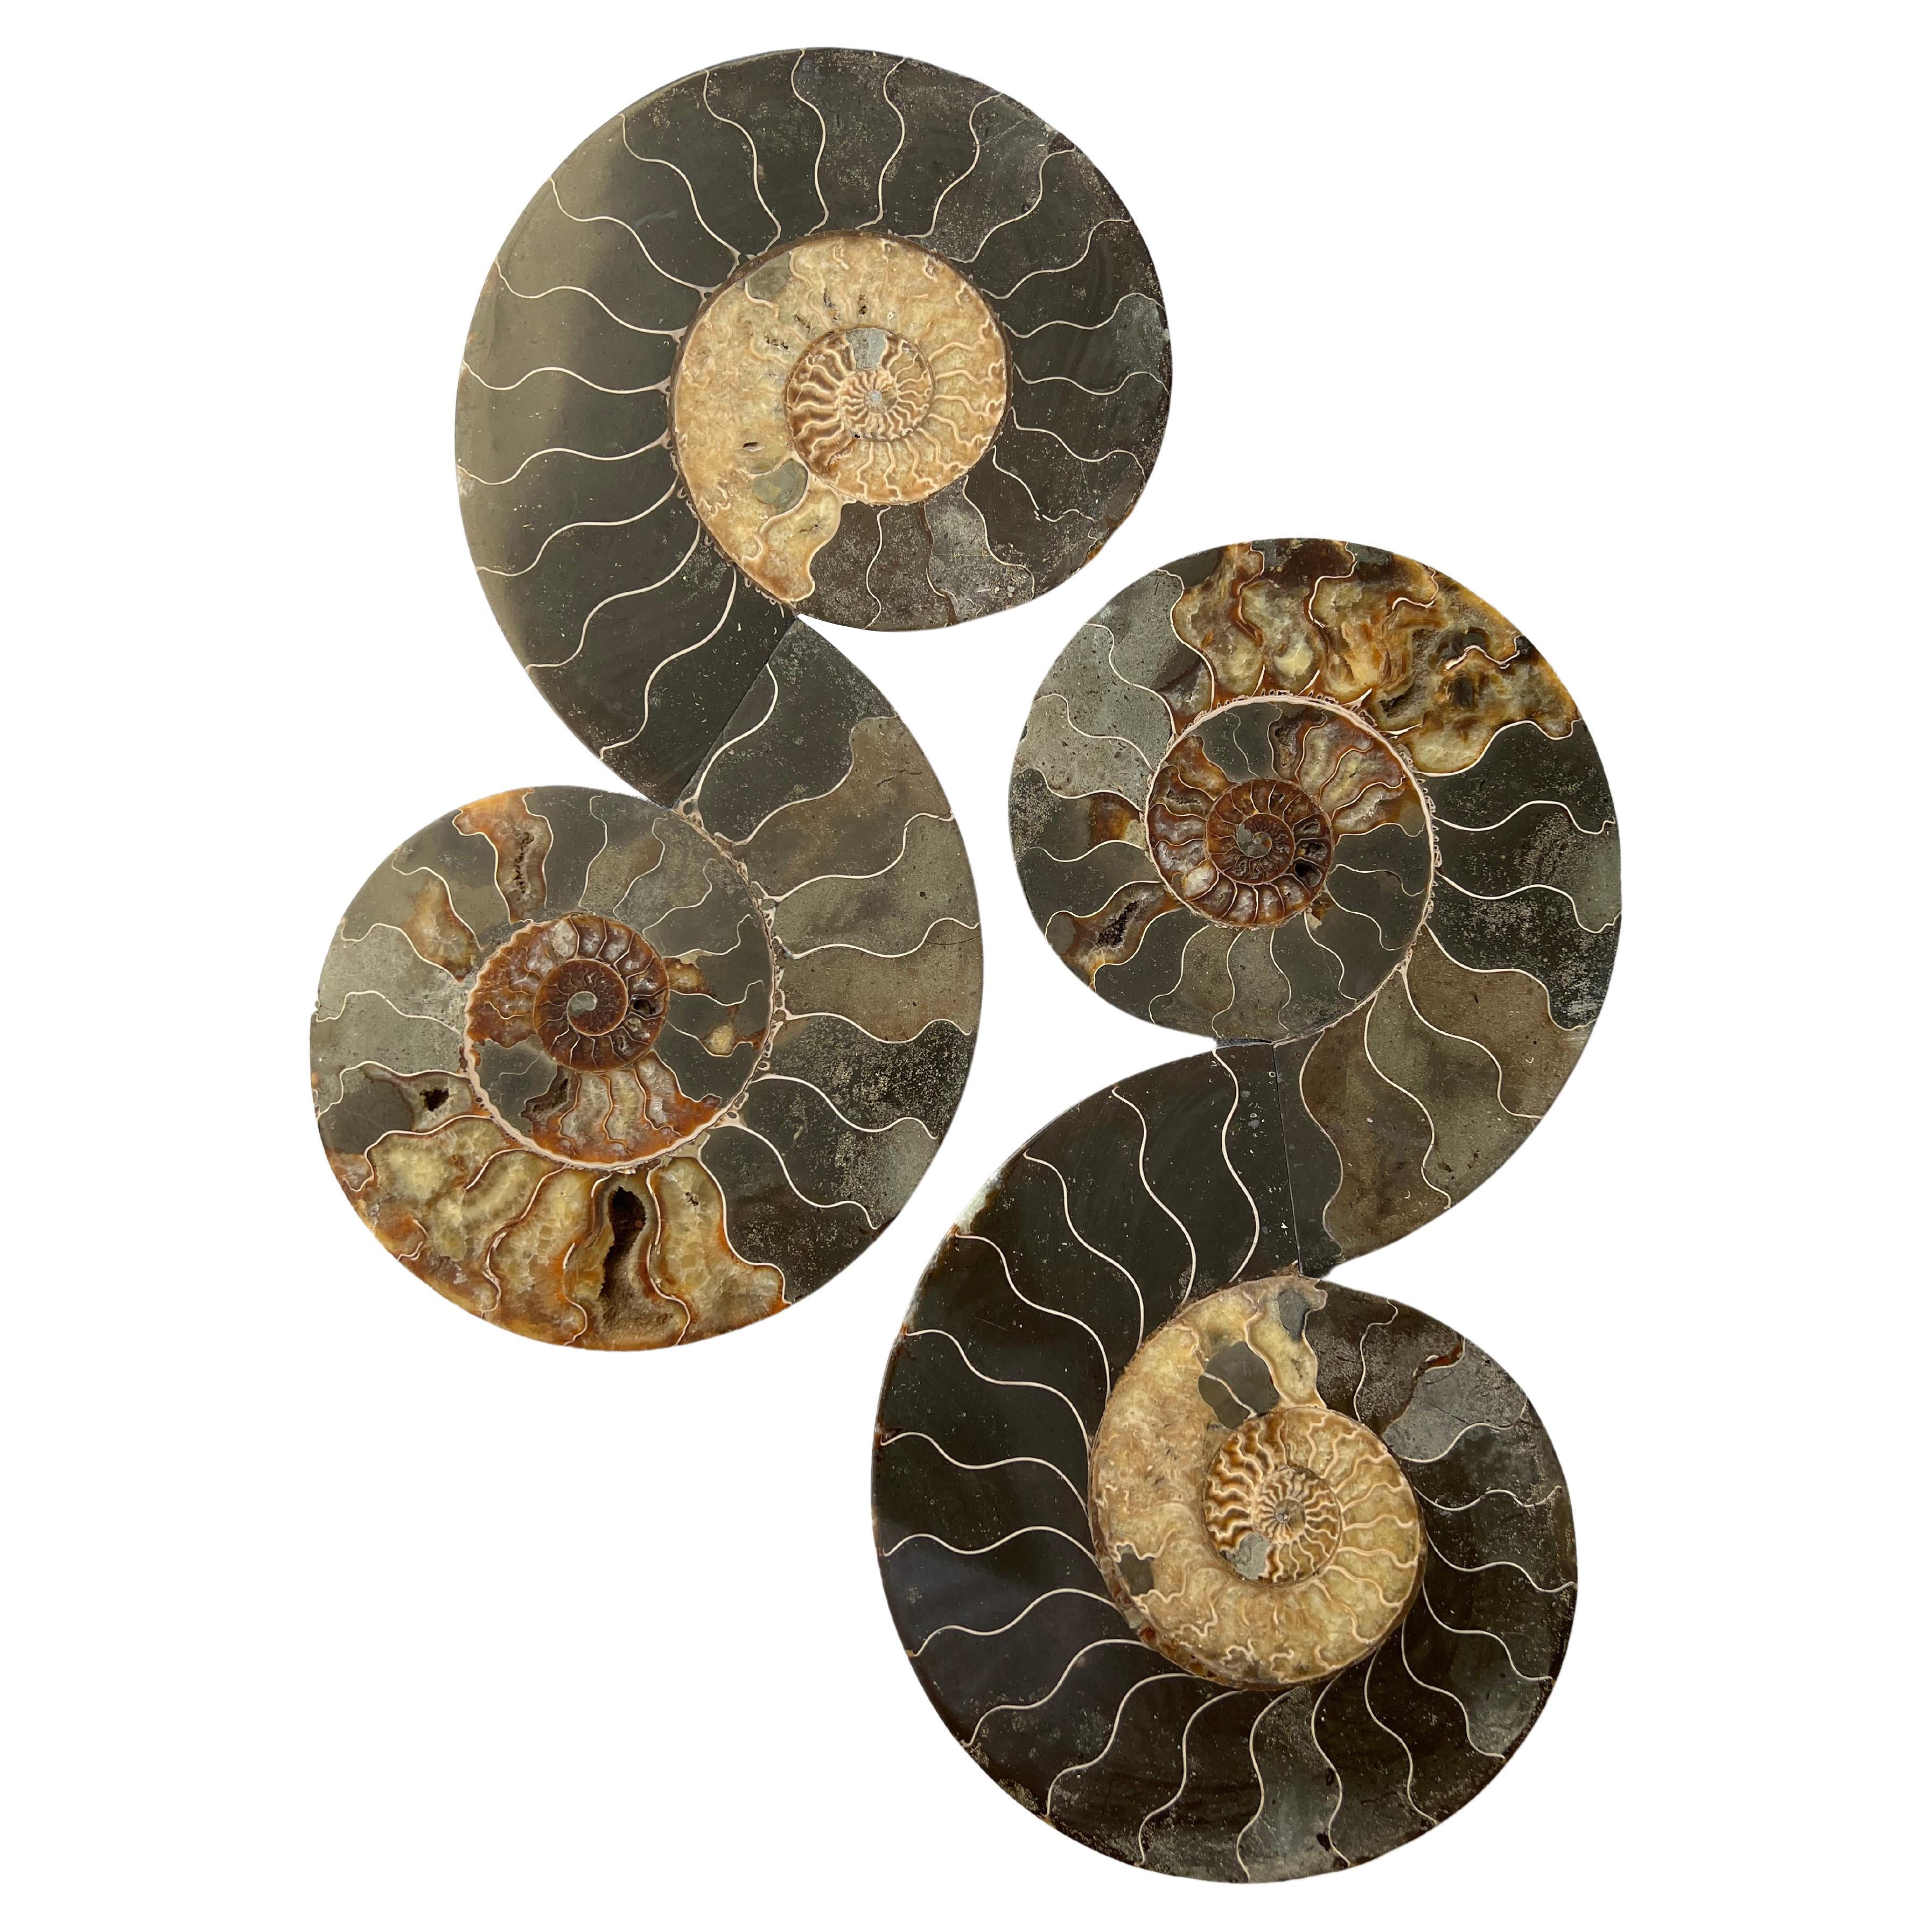 Ammonite Convolutions Sculptures by Mary Brōgger For Sale